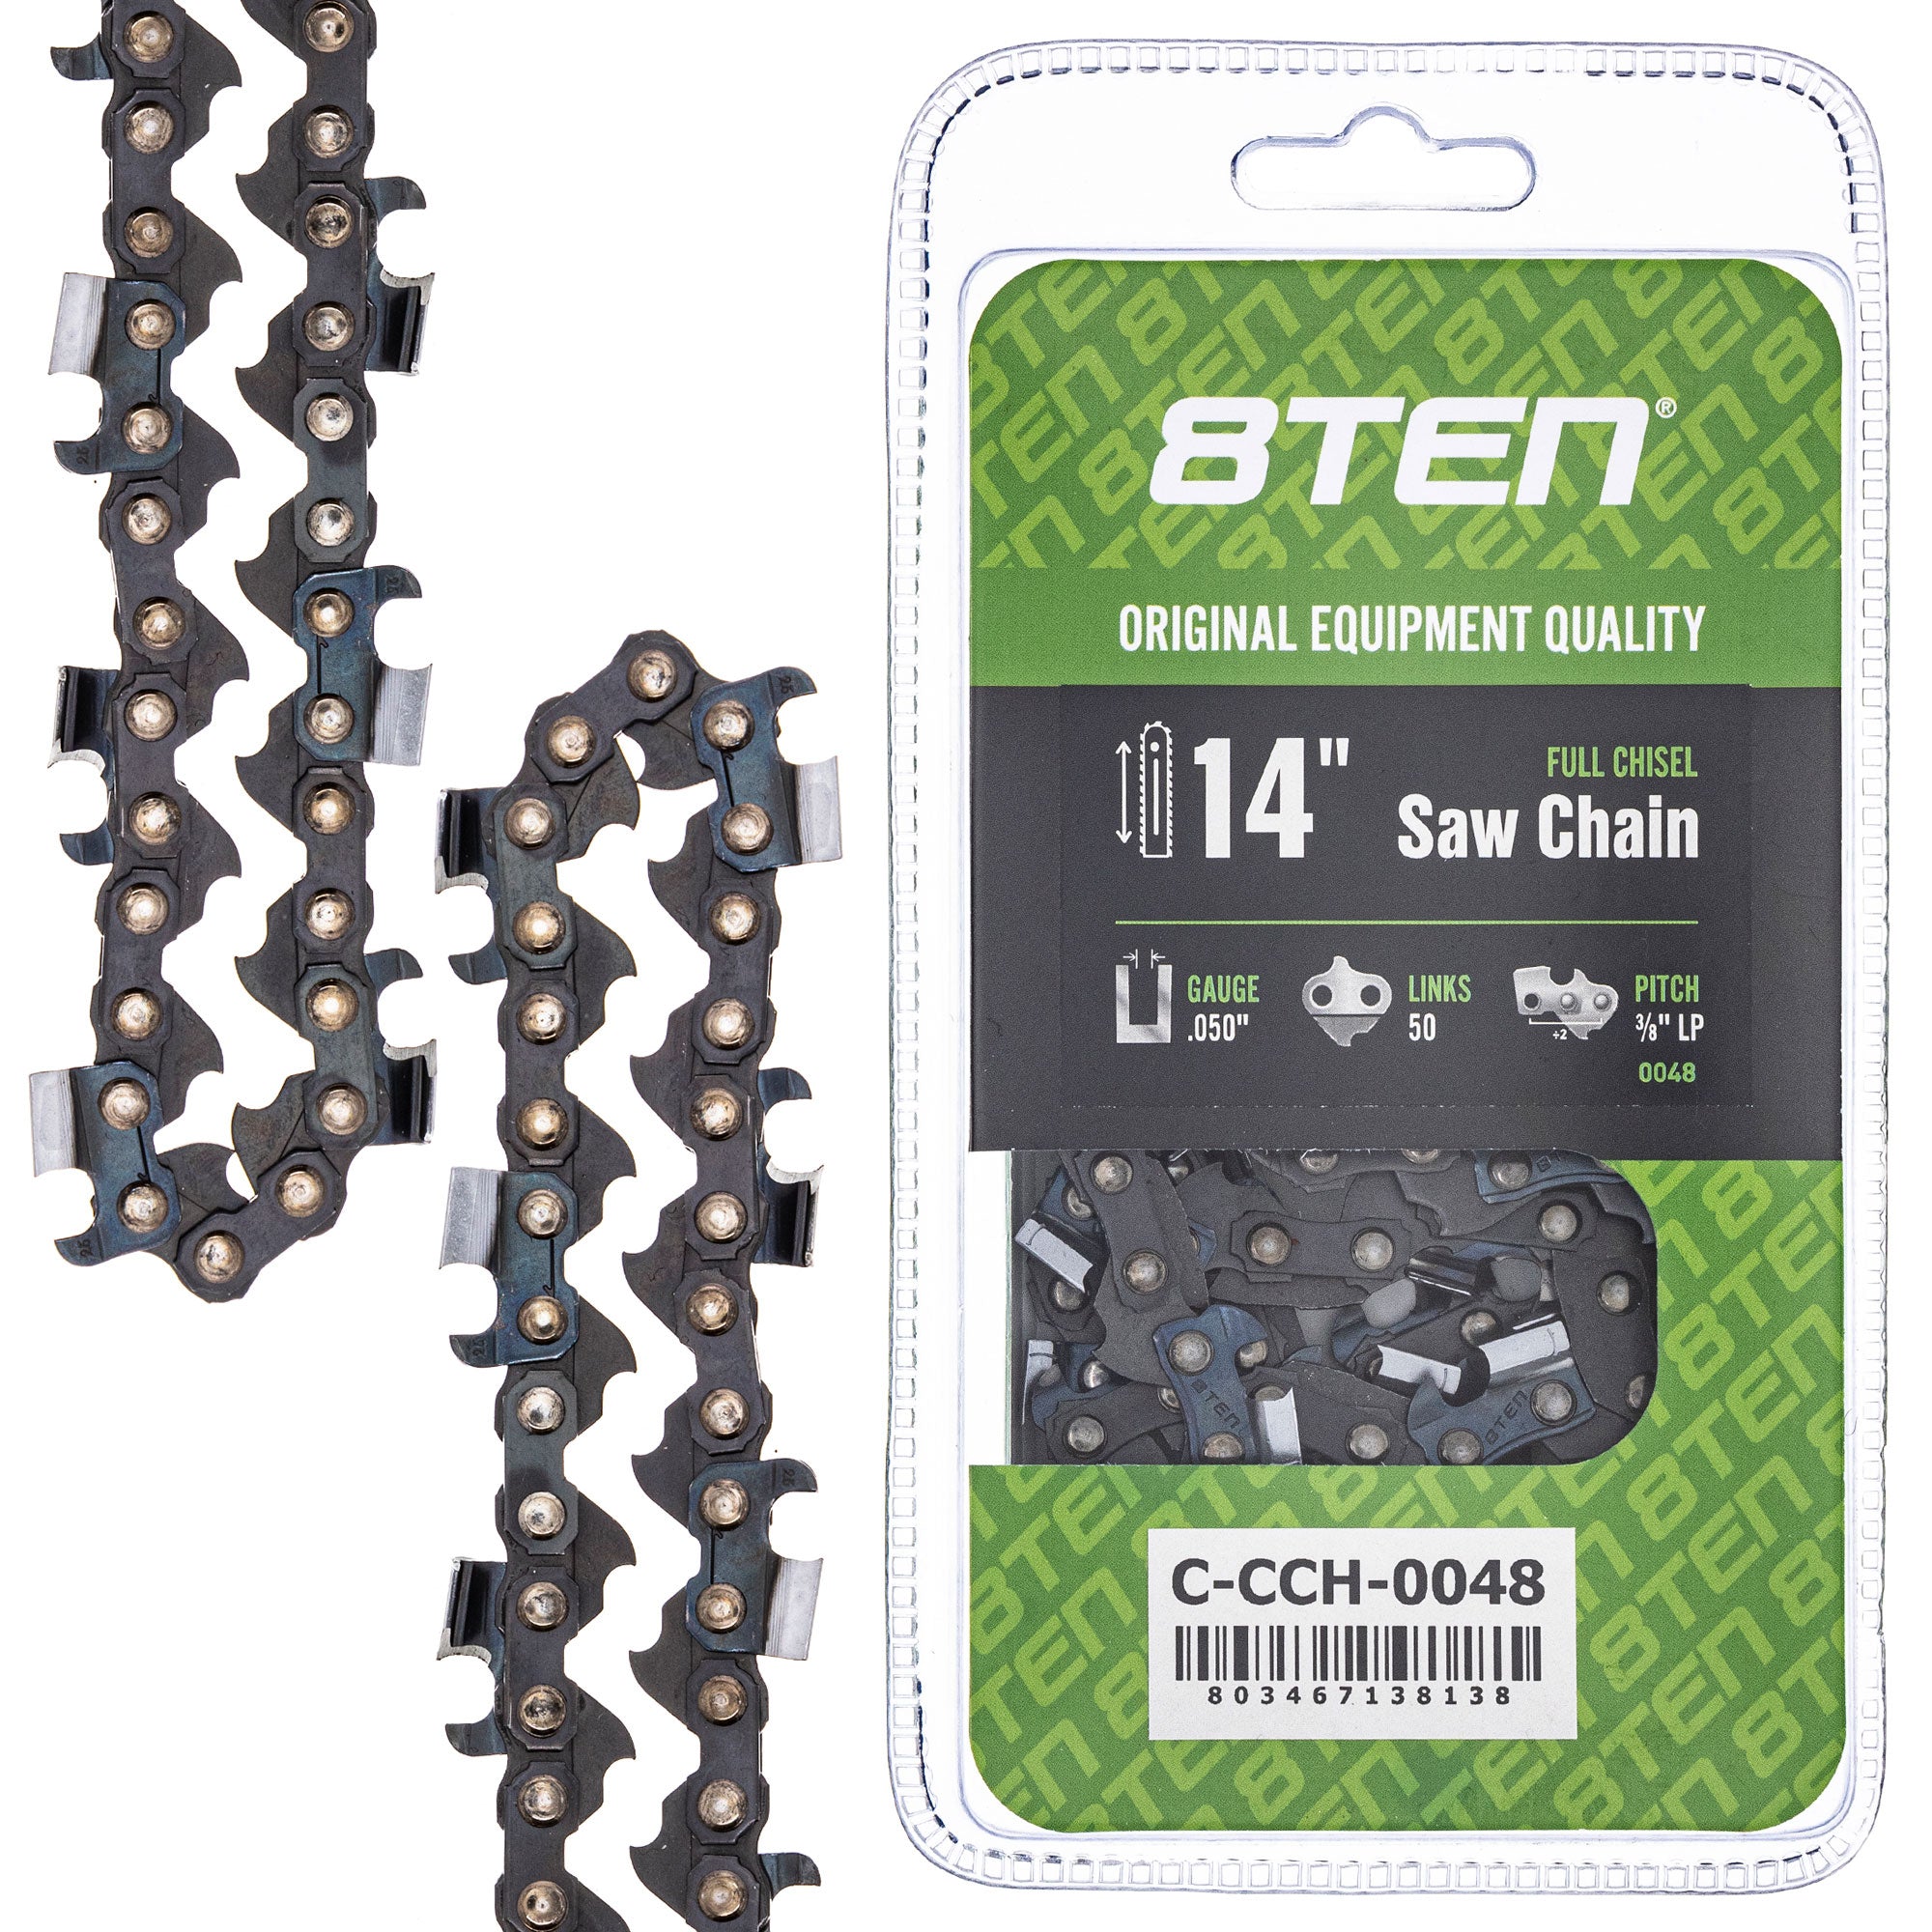 8TEN MK1010249 Guide Bar & Chain for MSE MS HT E